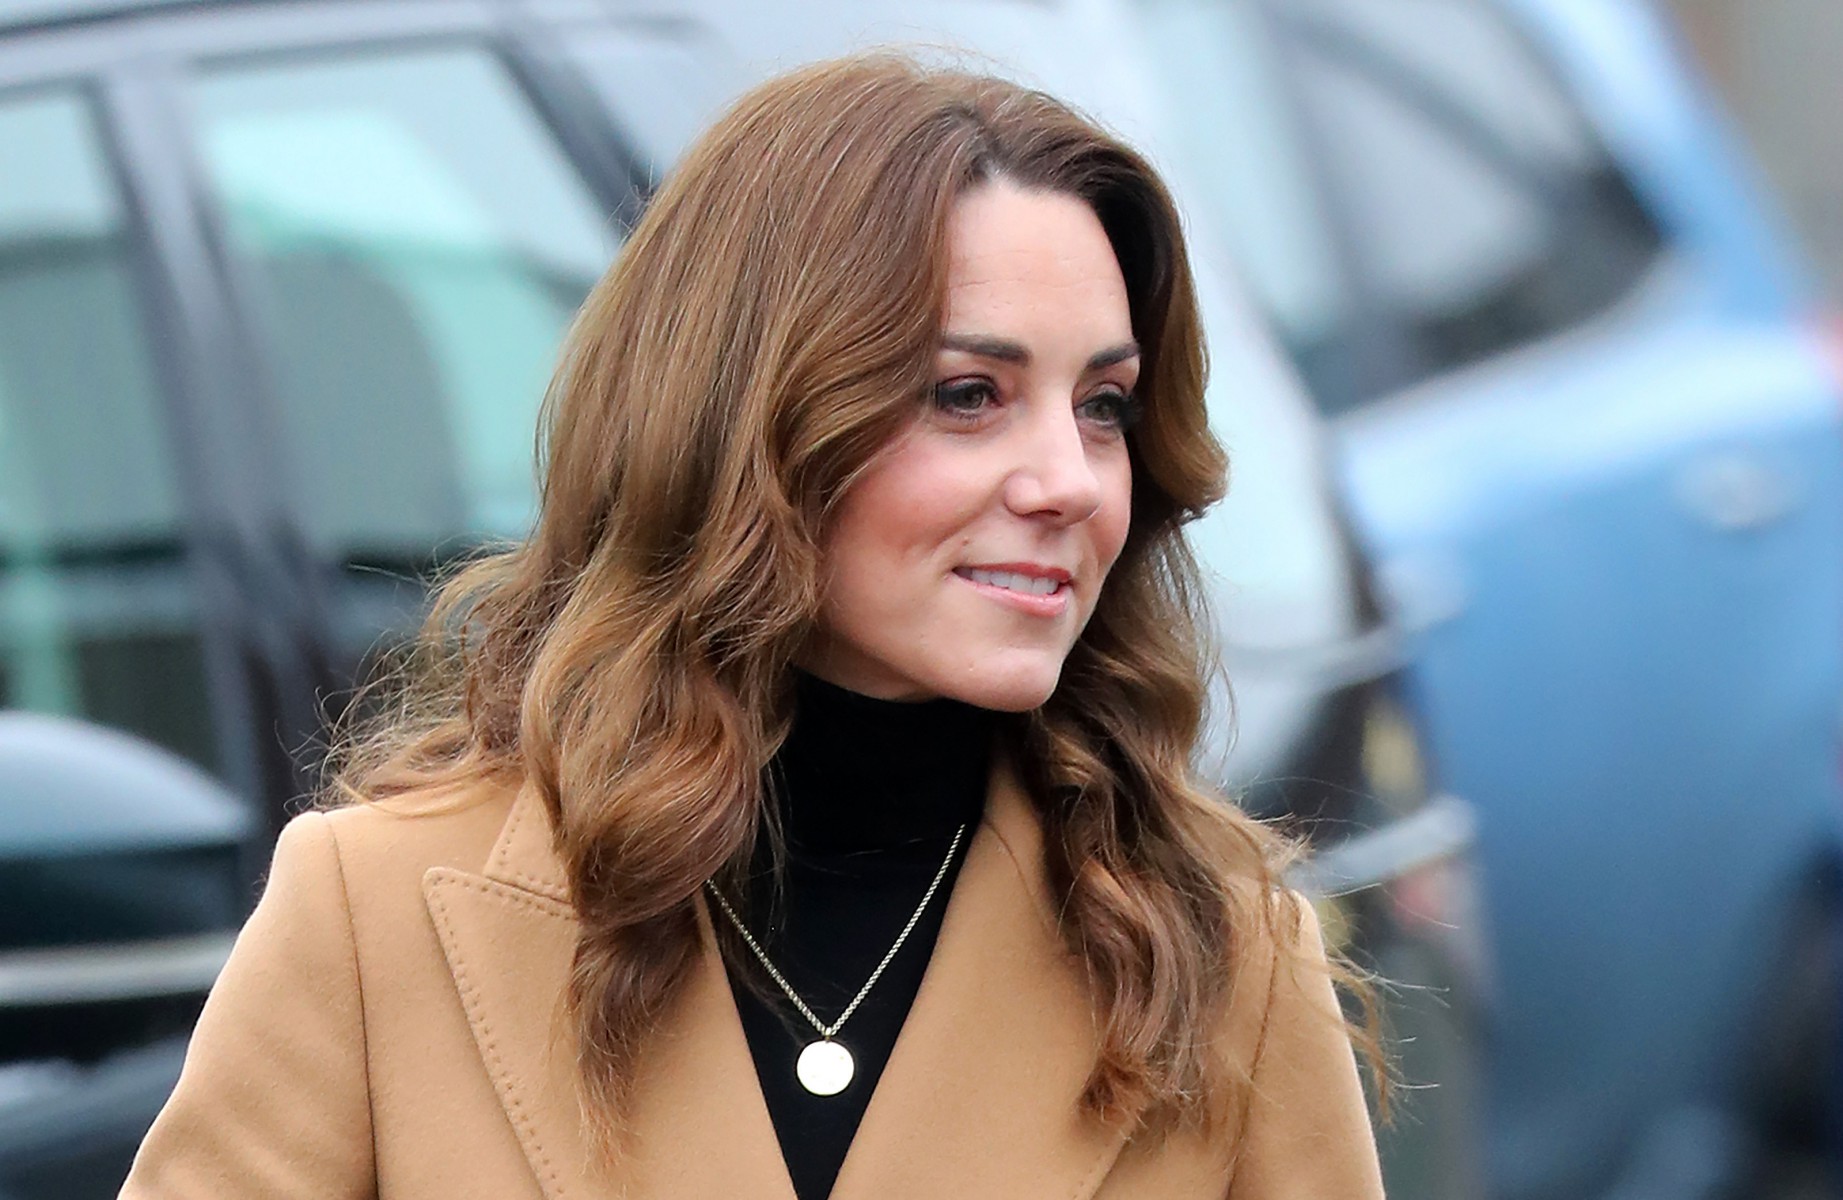 Kate wore her hair down as she arrived in Cardiff